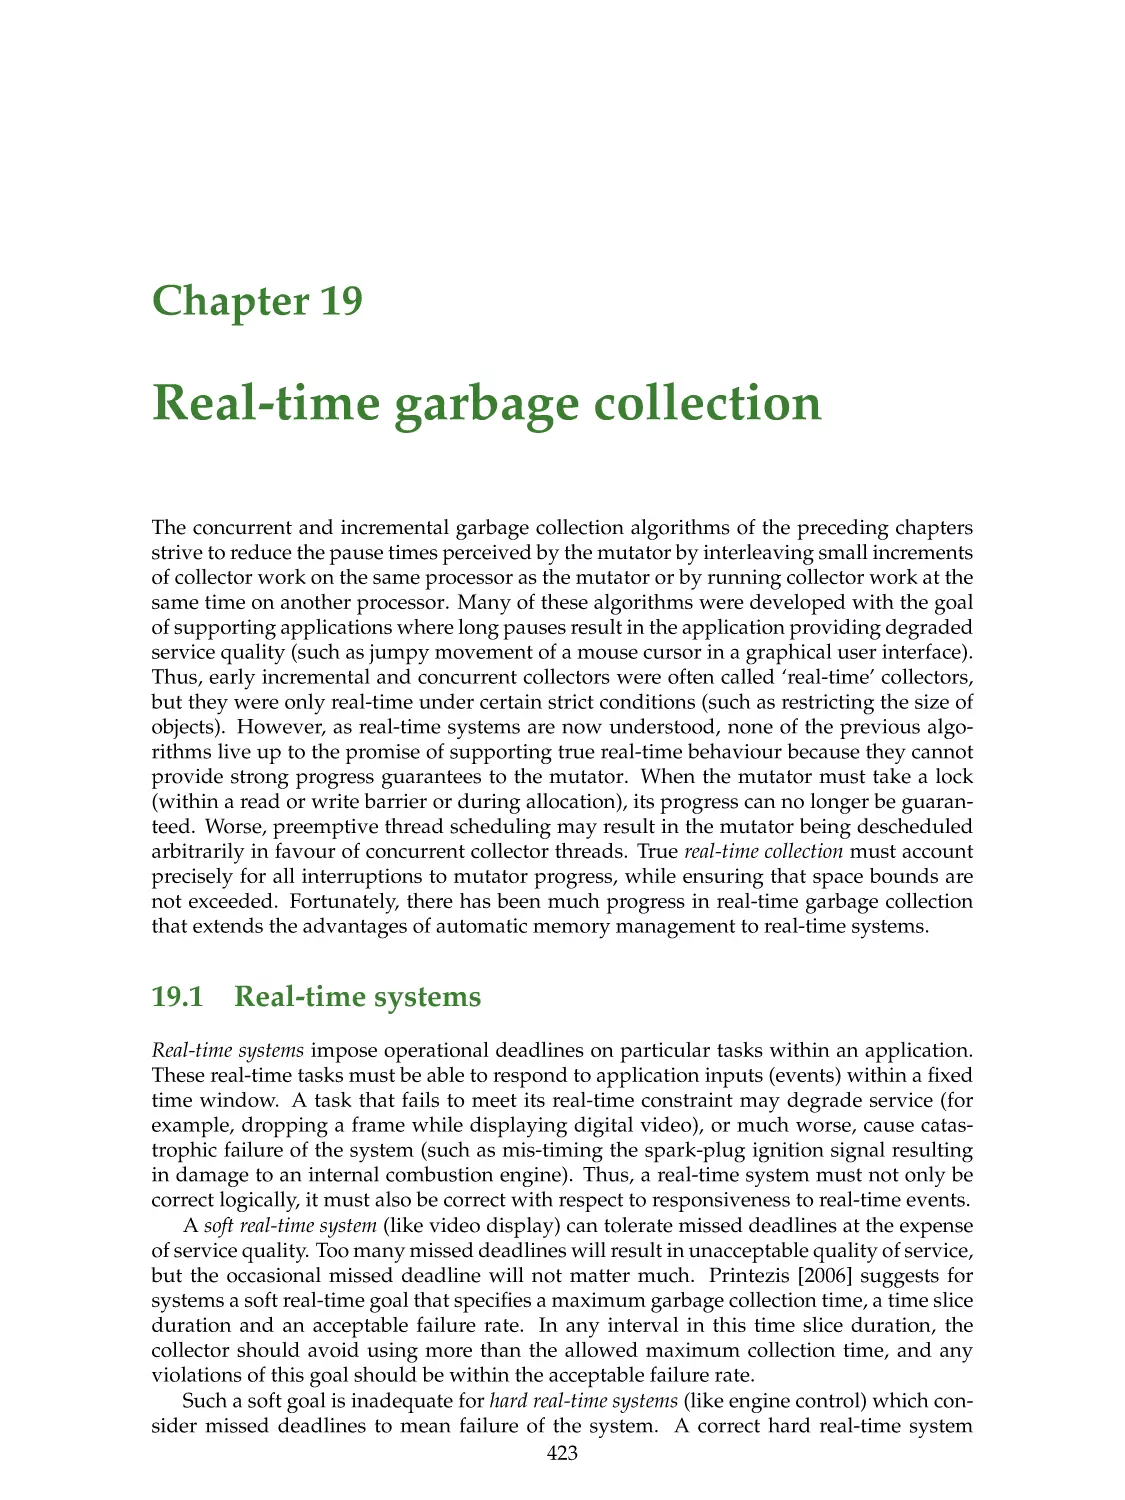 19. Real-time garbage collection
19.1. Real-time systems